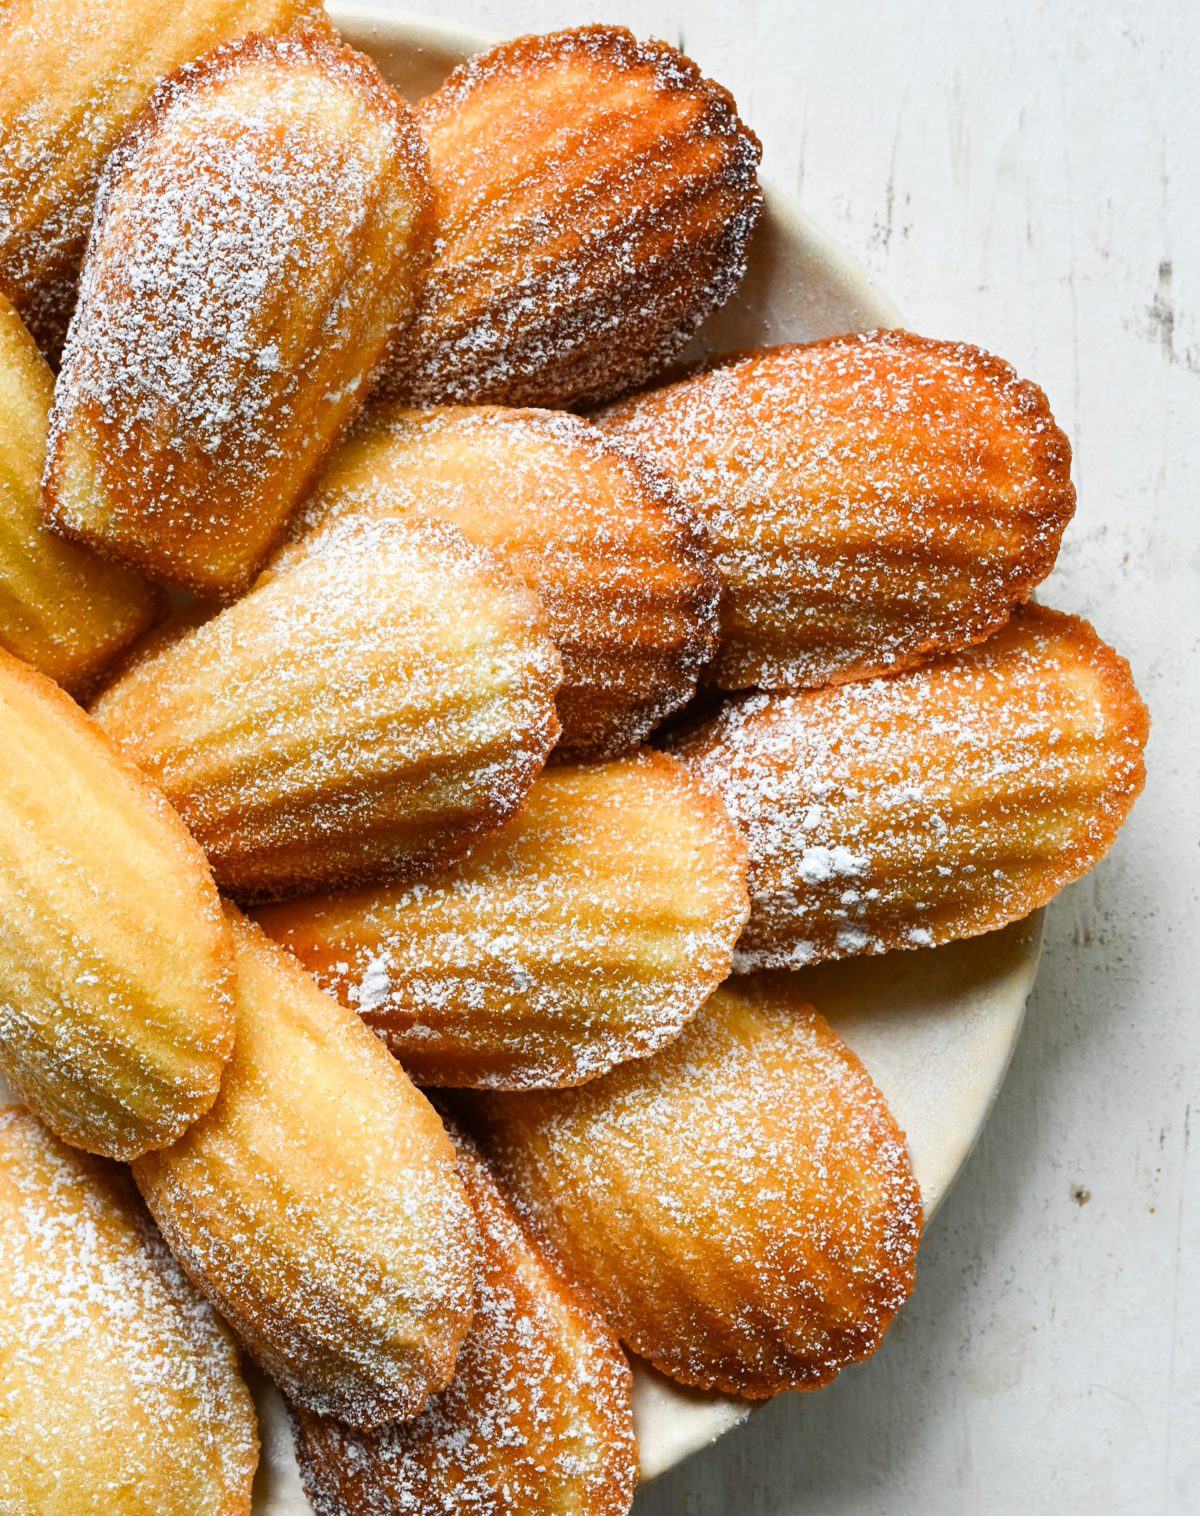 French Madeleines With Almonds and Apricot Glaze Recipe